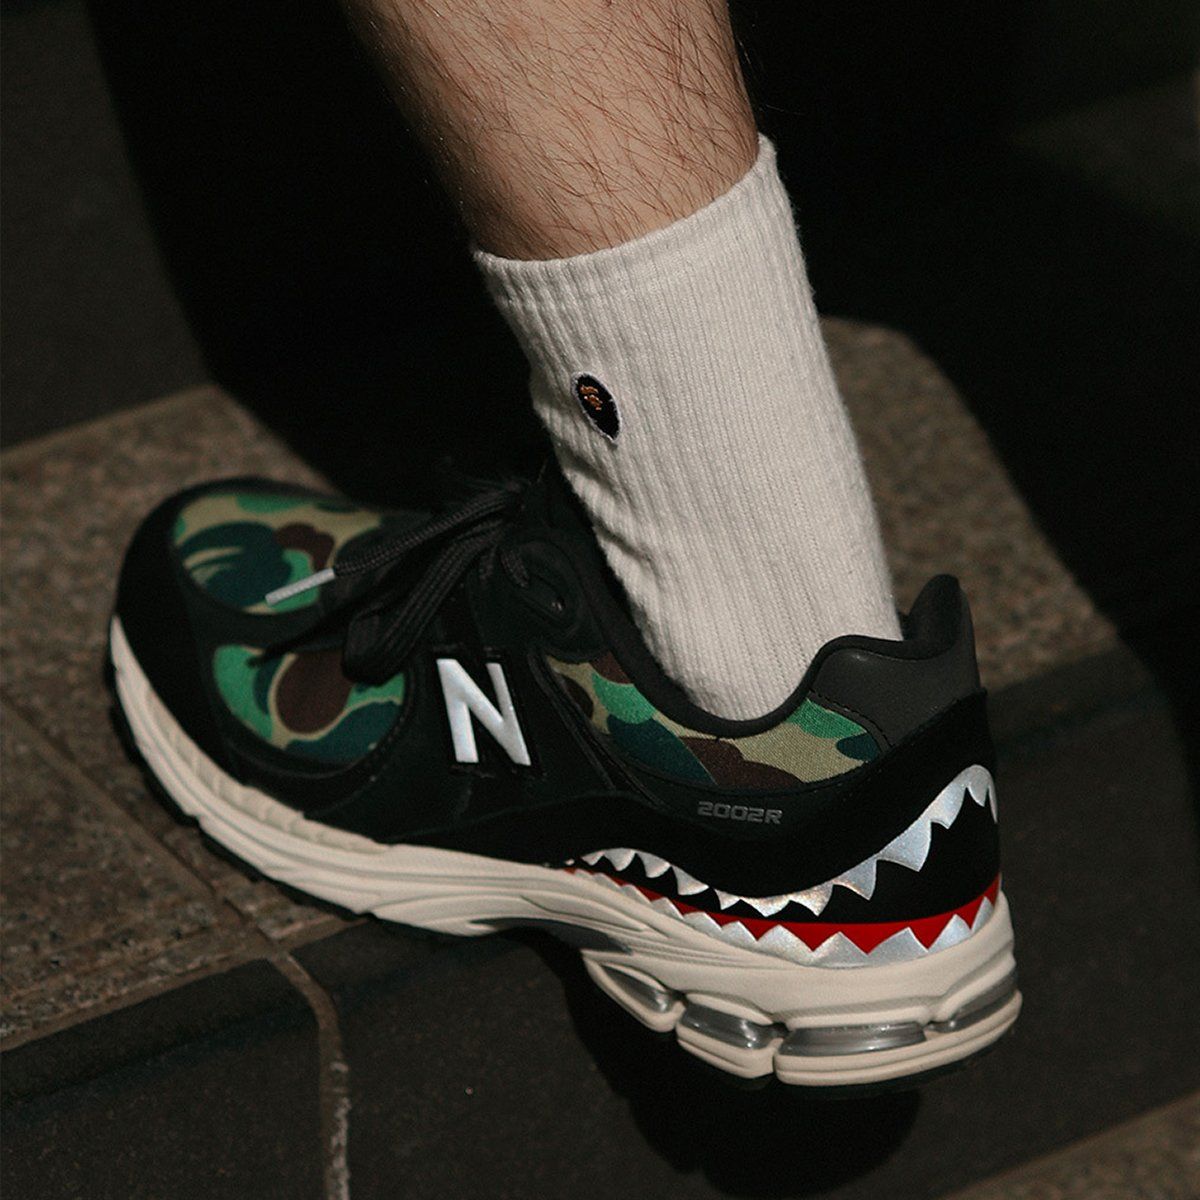 BAPE x New Balance 2002R Collection Drops June 5th | HOUSE OF HEAT